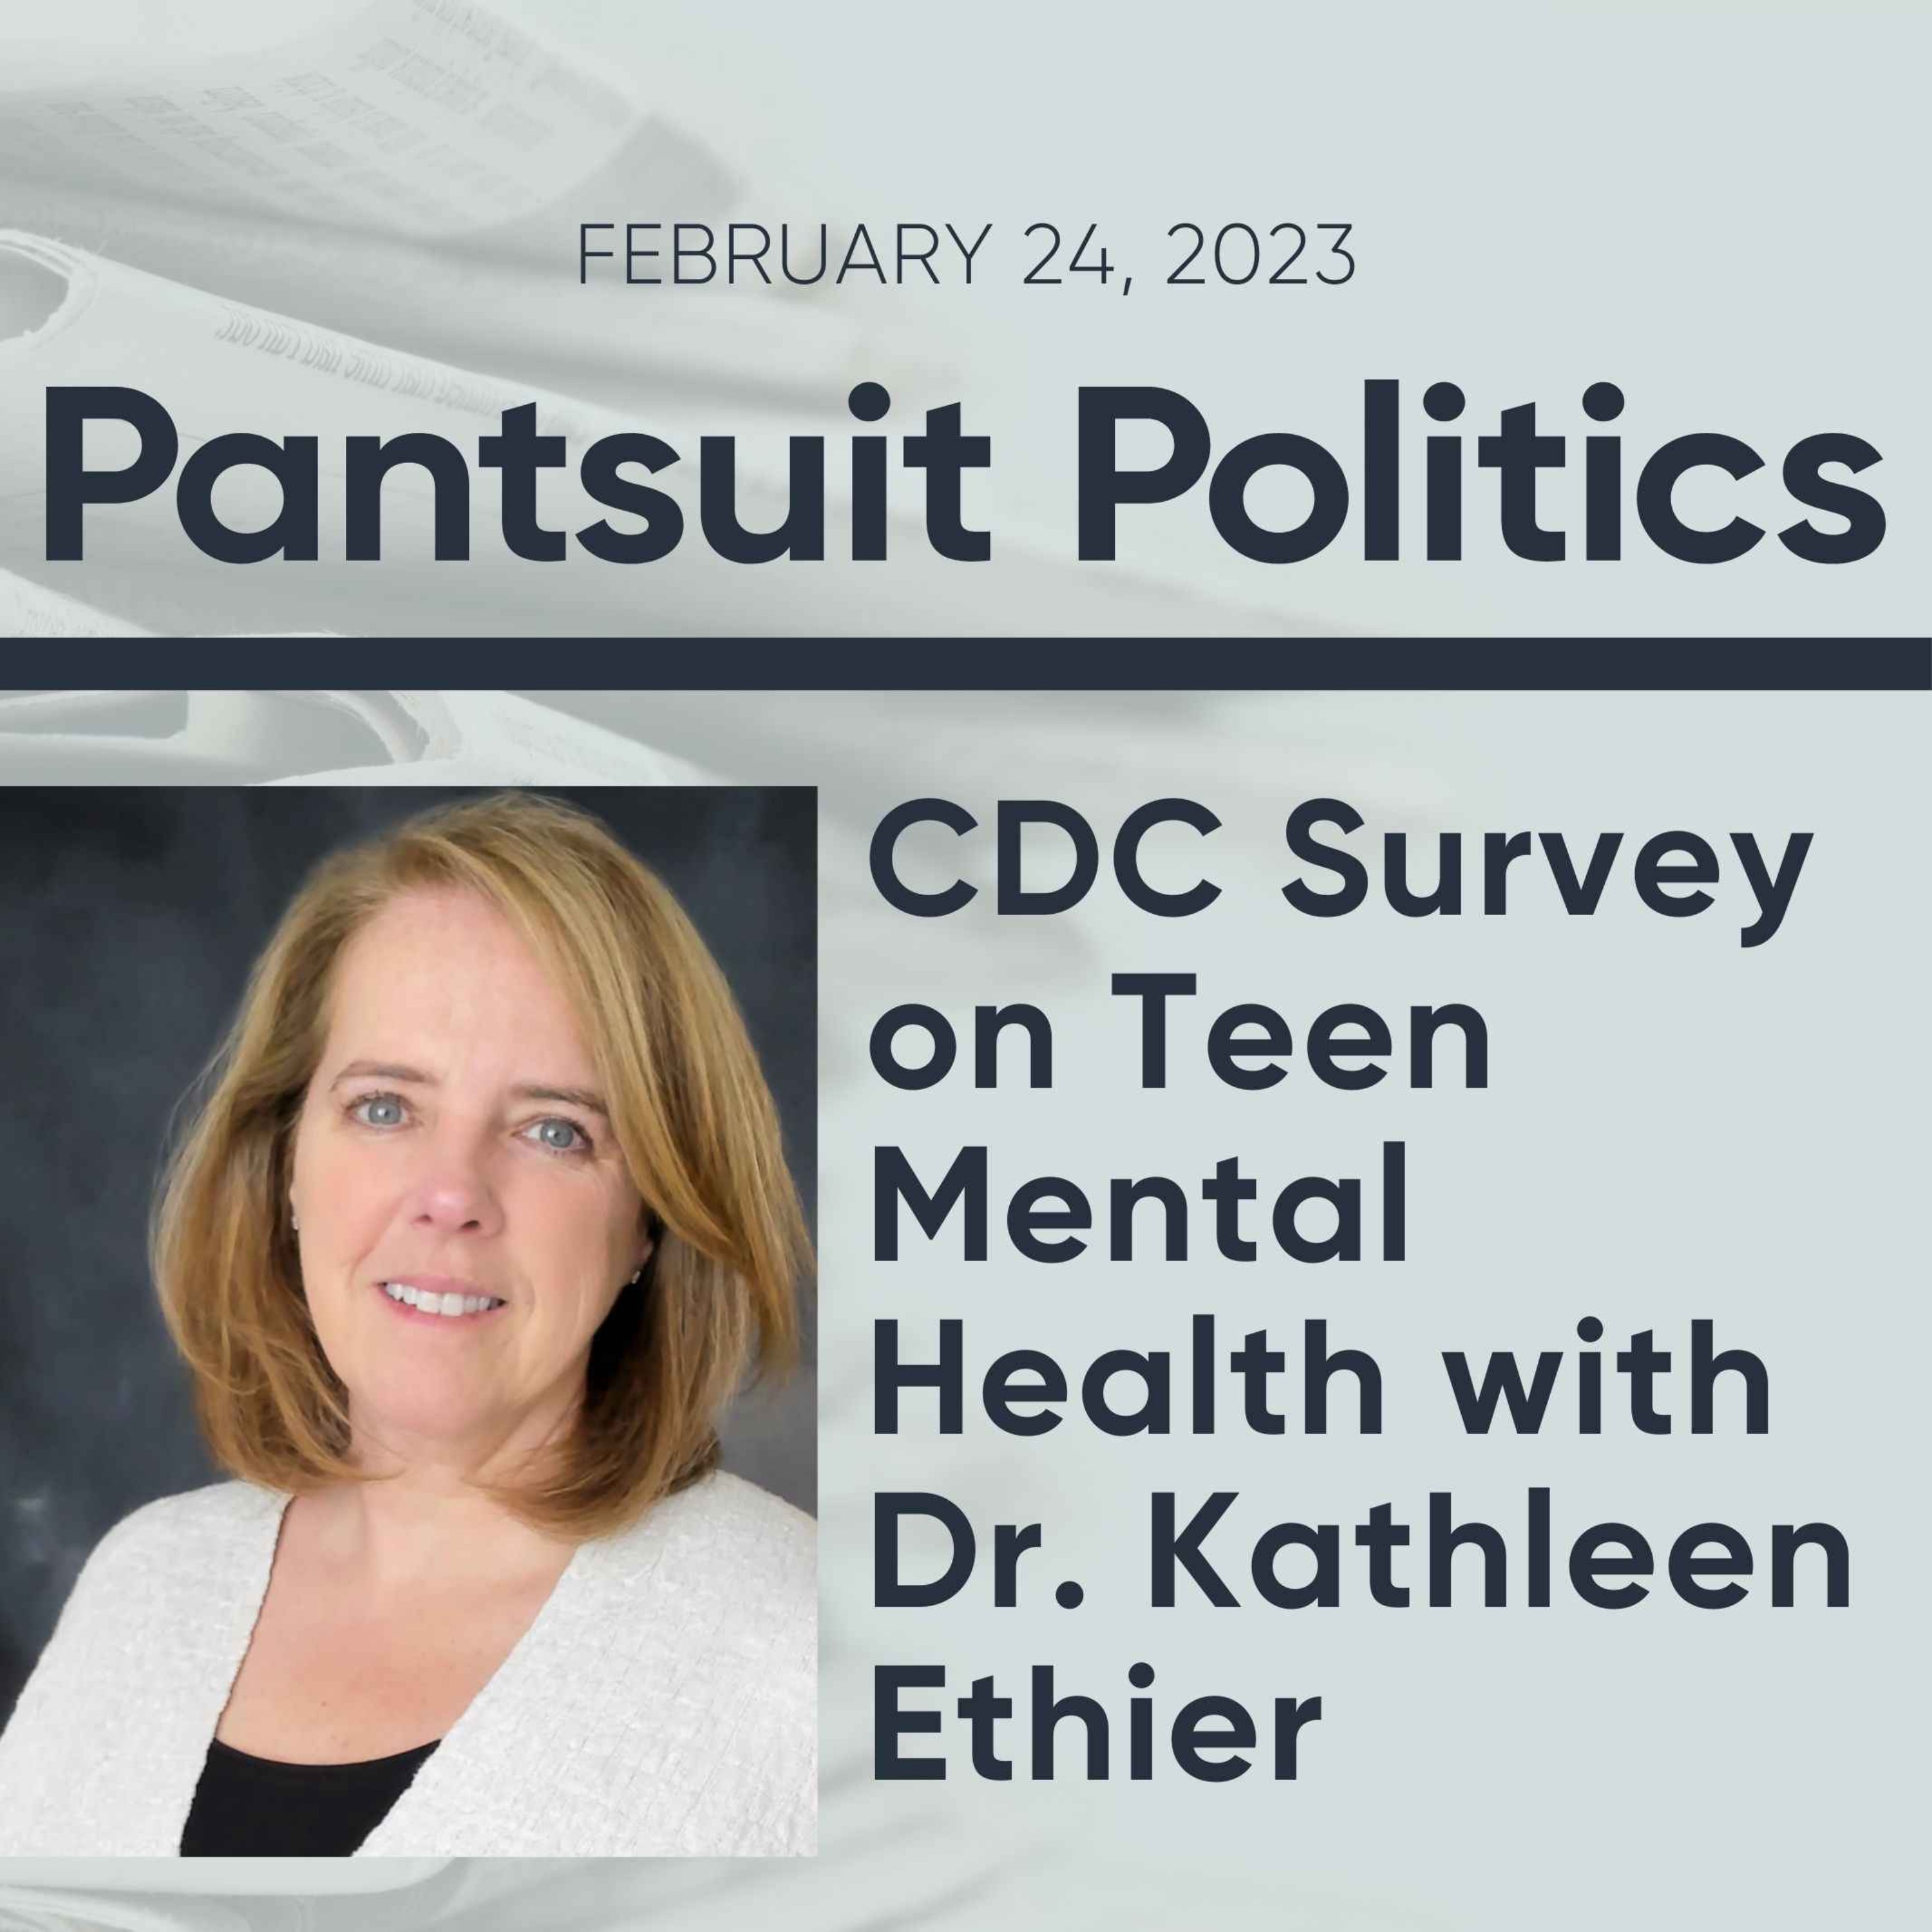 CDC Survey on Teen Mental Health with Dr. Kathleen Ethier